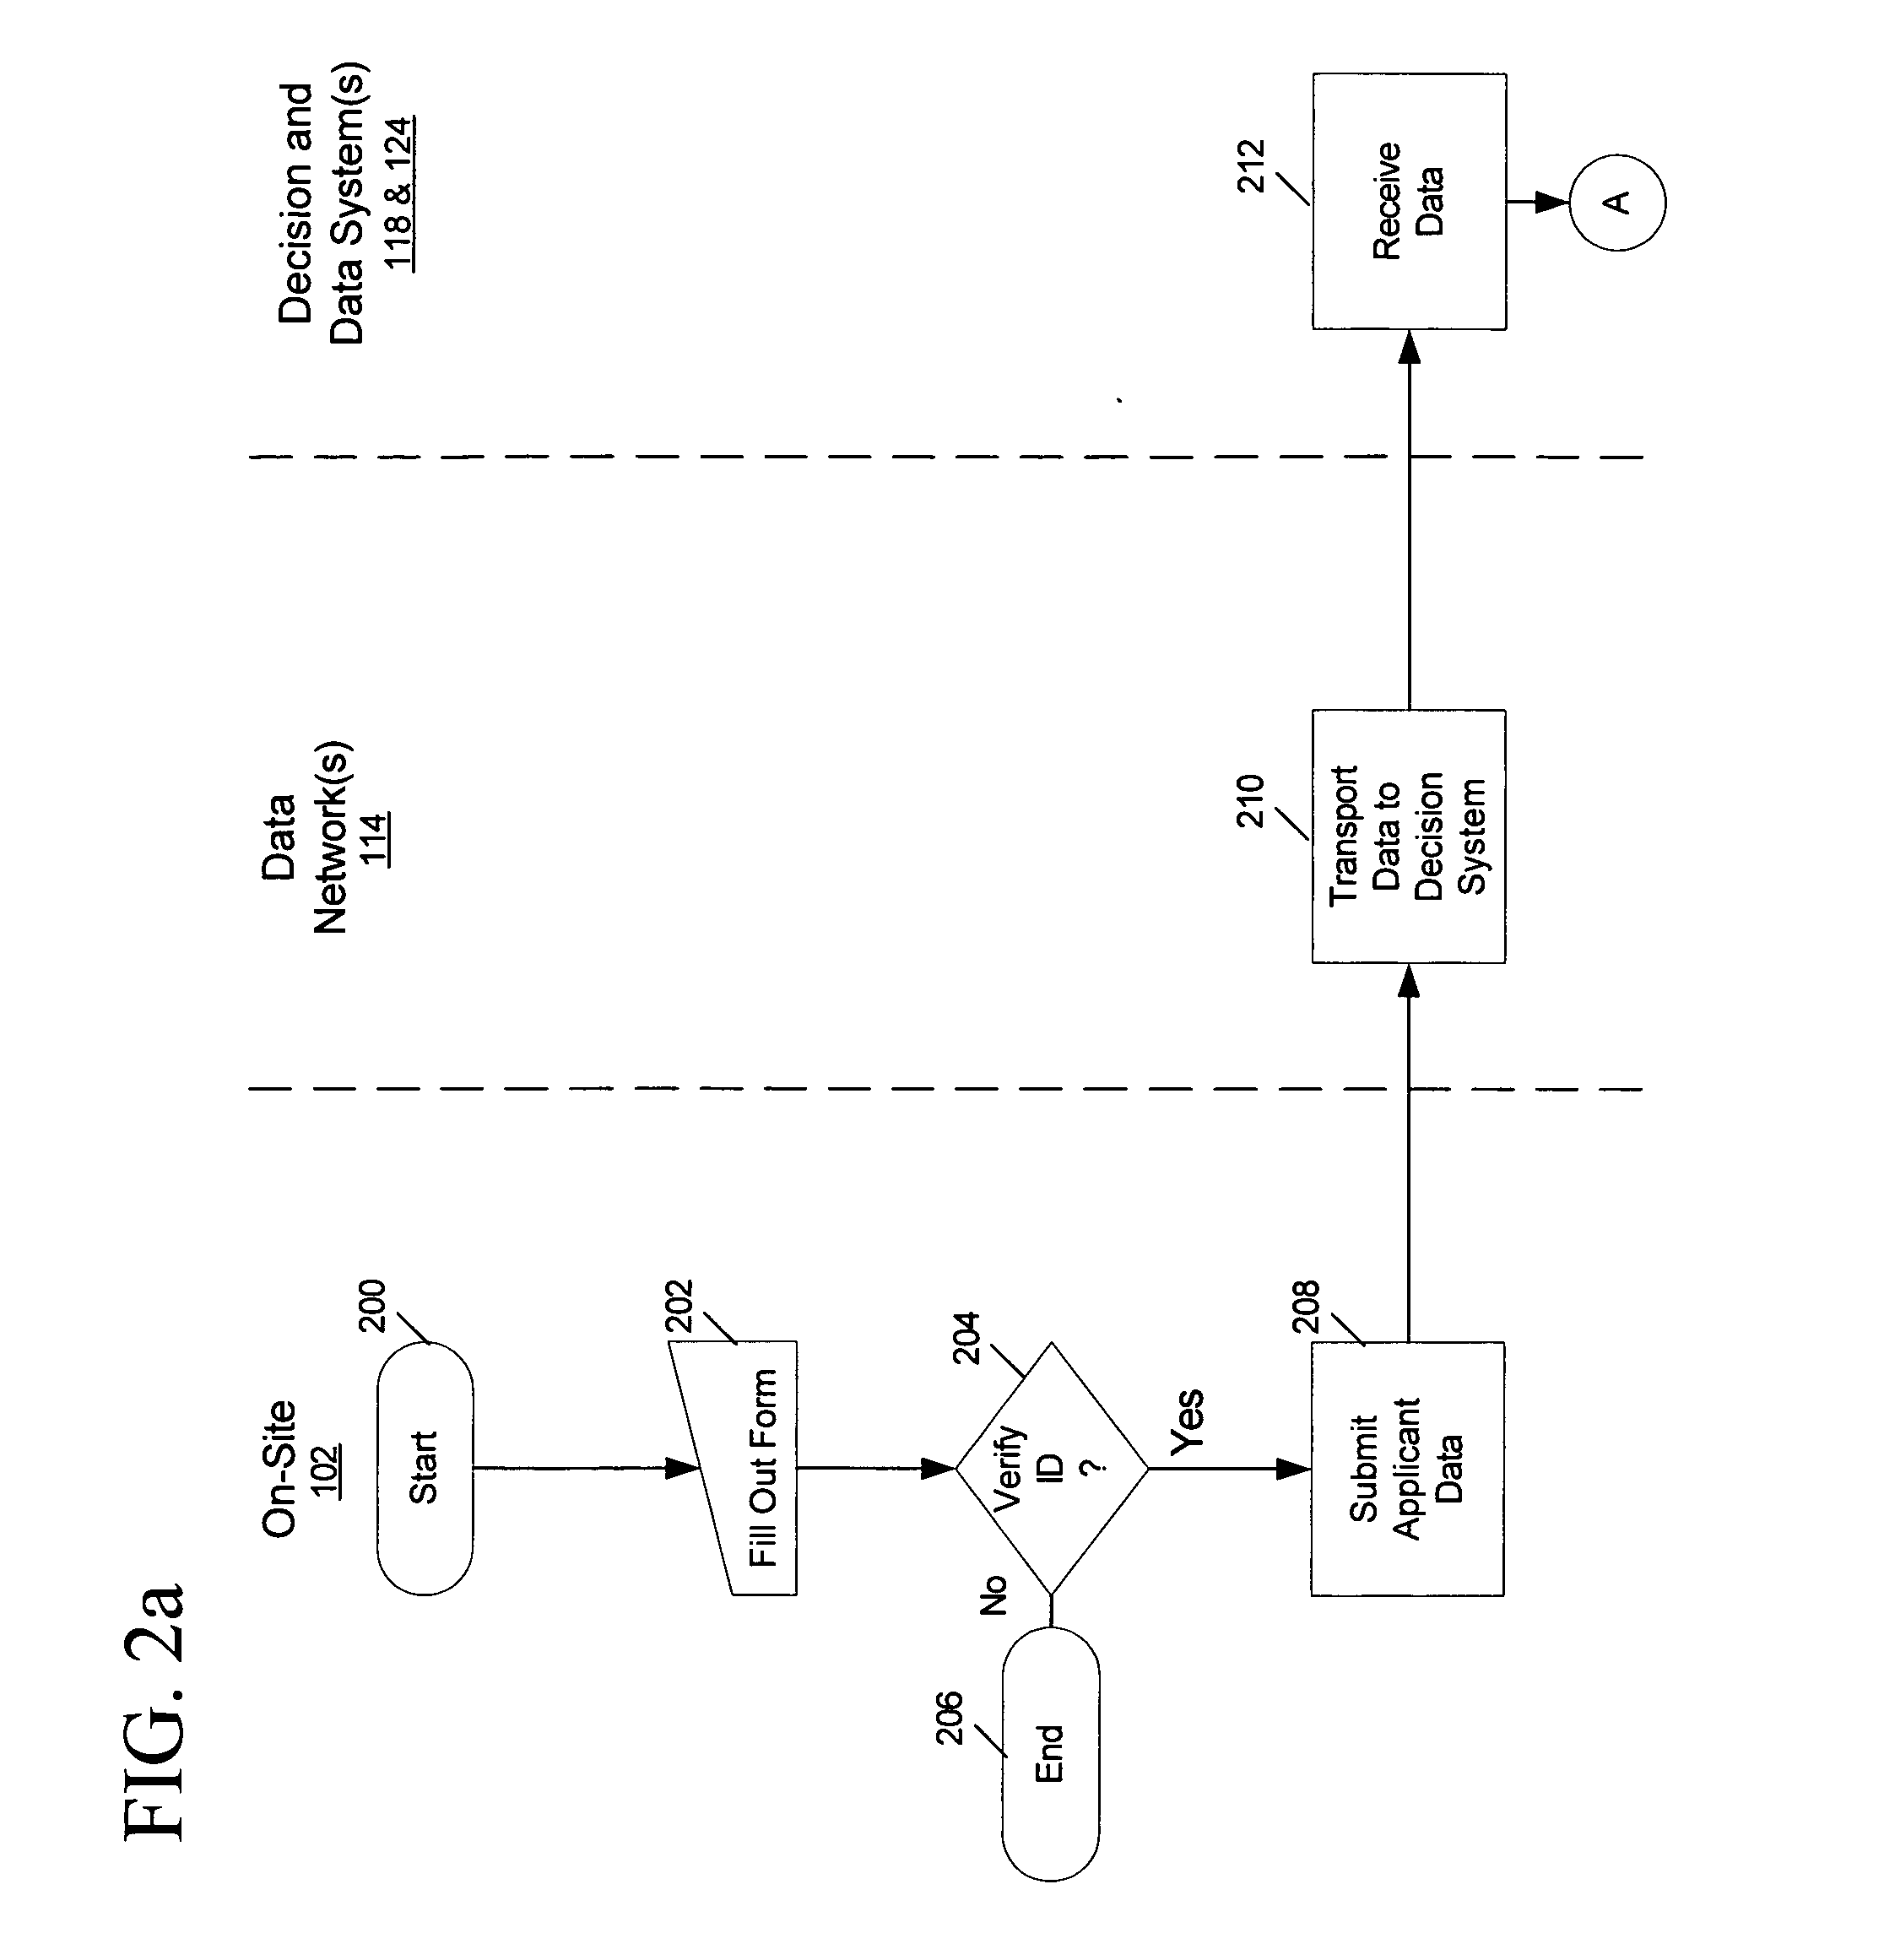 System and method for providing instant-decision, financial network-based payment cards